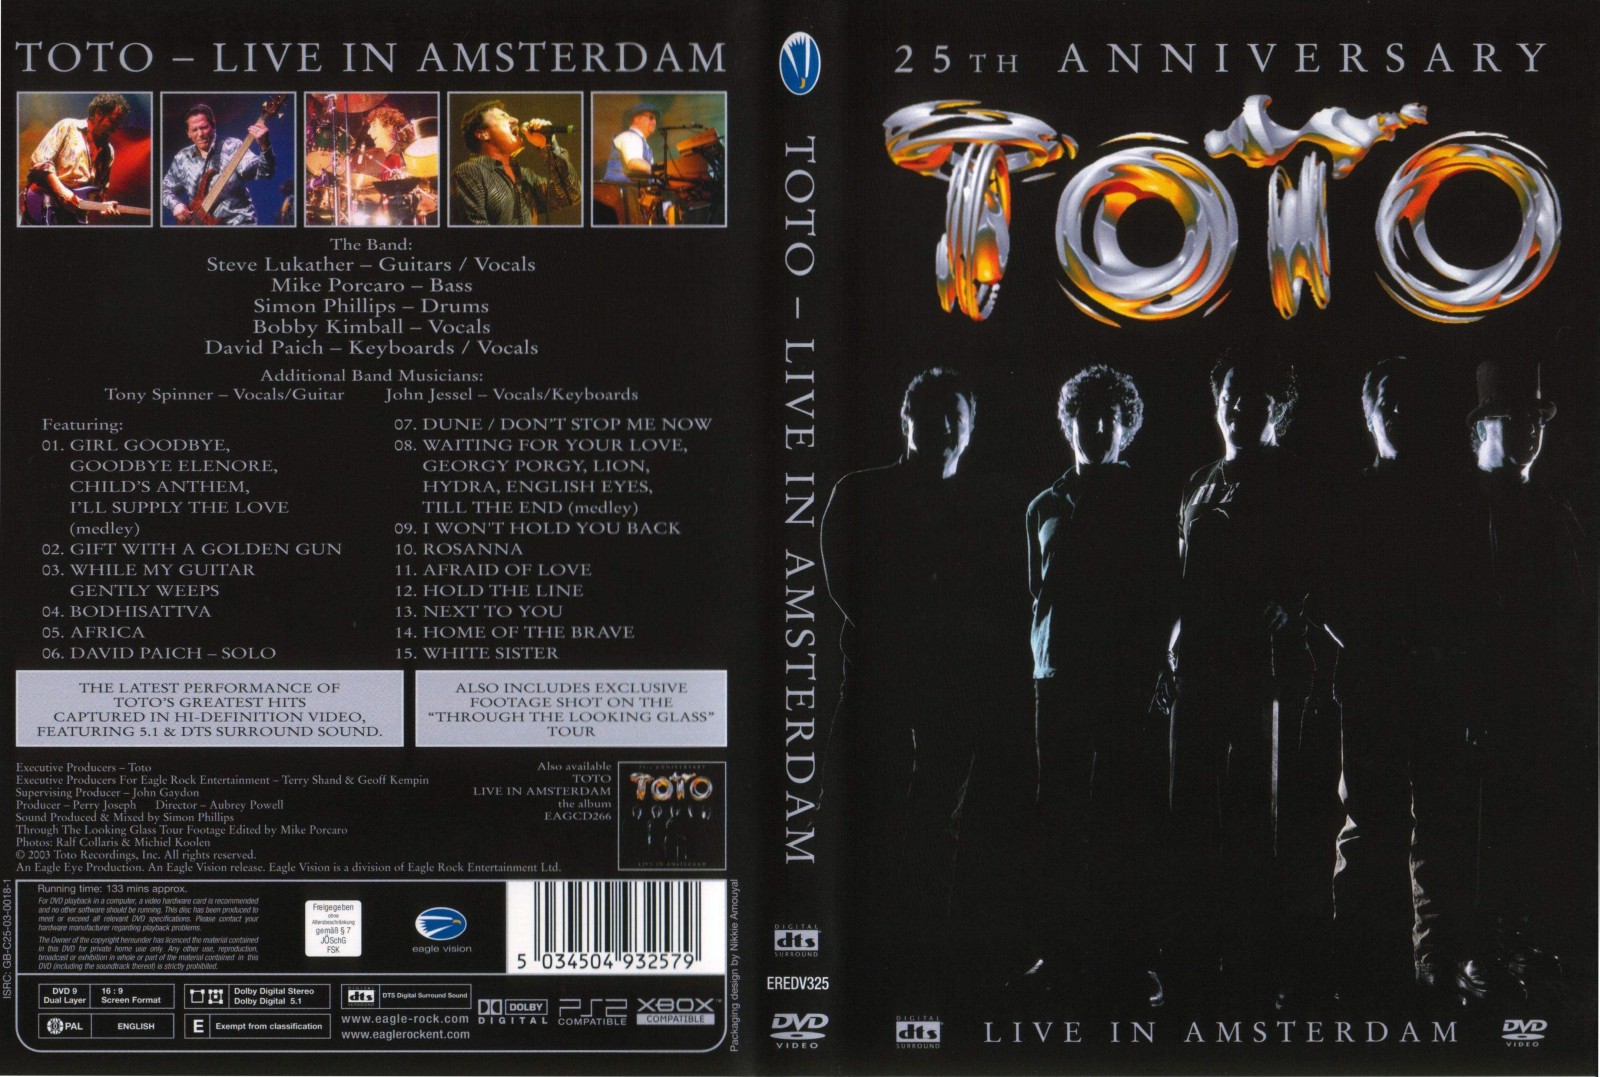 Jaquette DVD Toto live in amsterdam